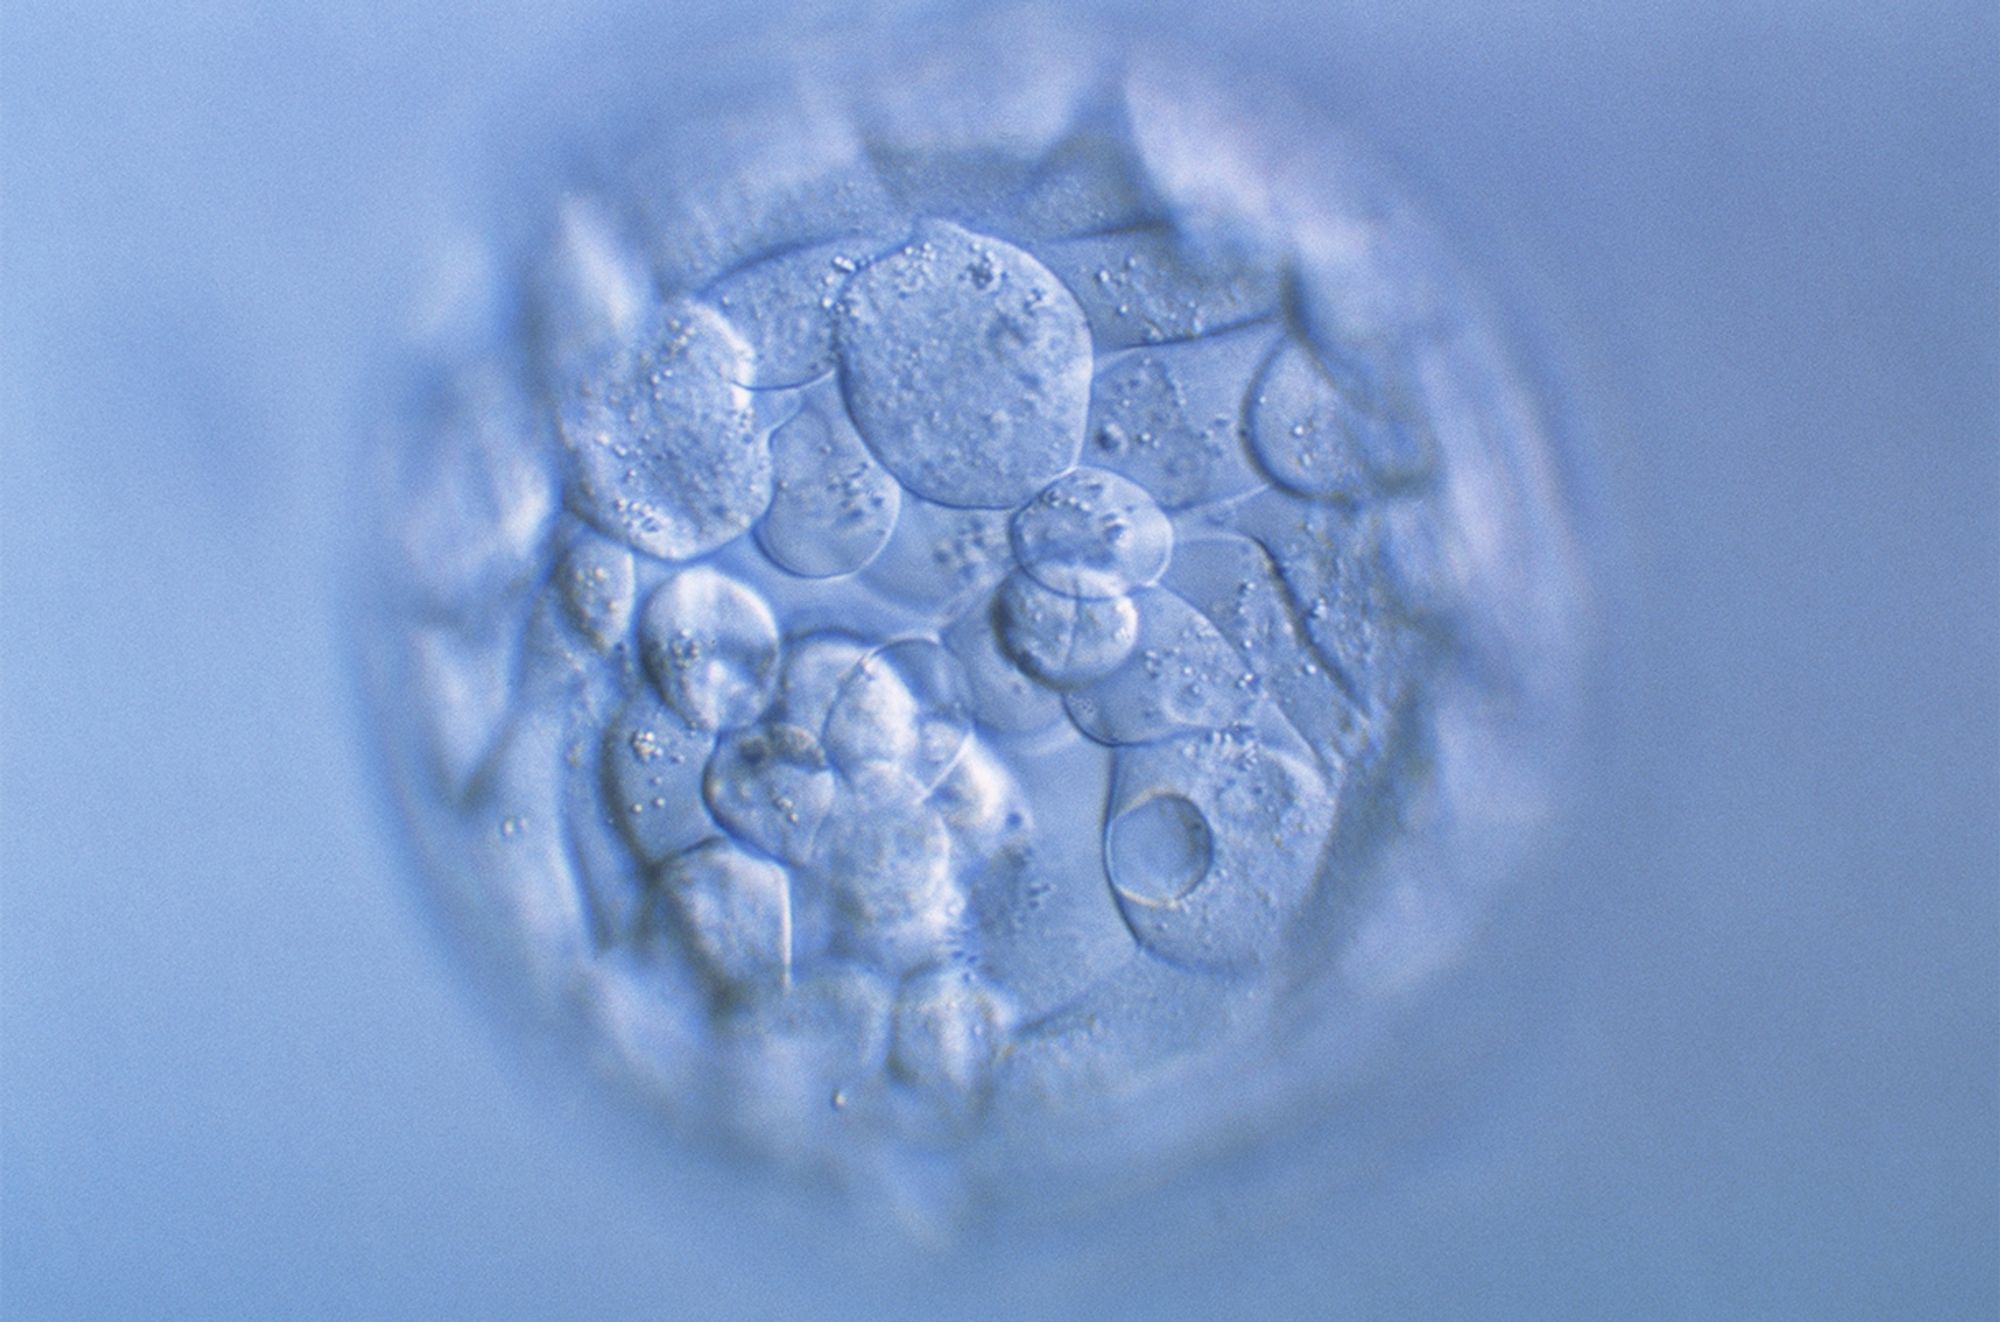 Scientists say they can read nearly the whole genome of an IVF-created embryo